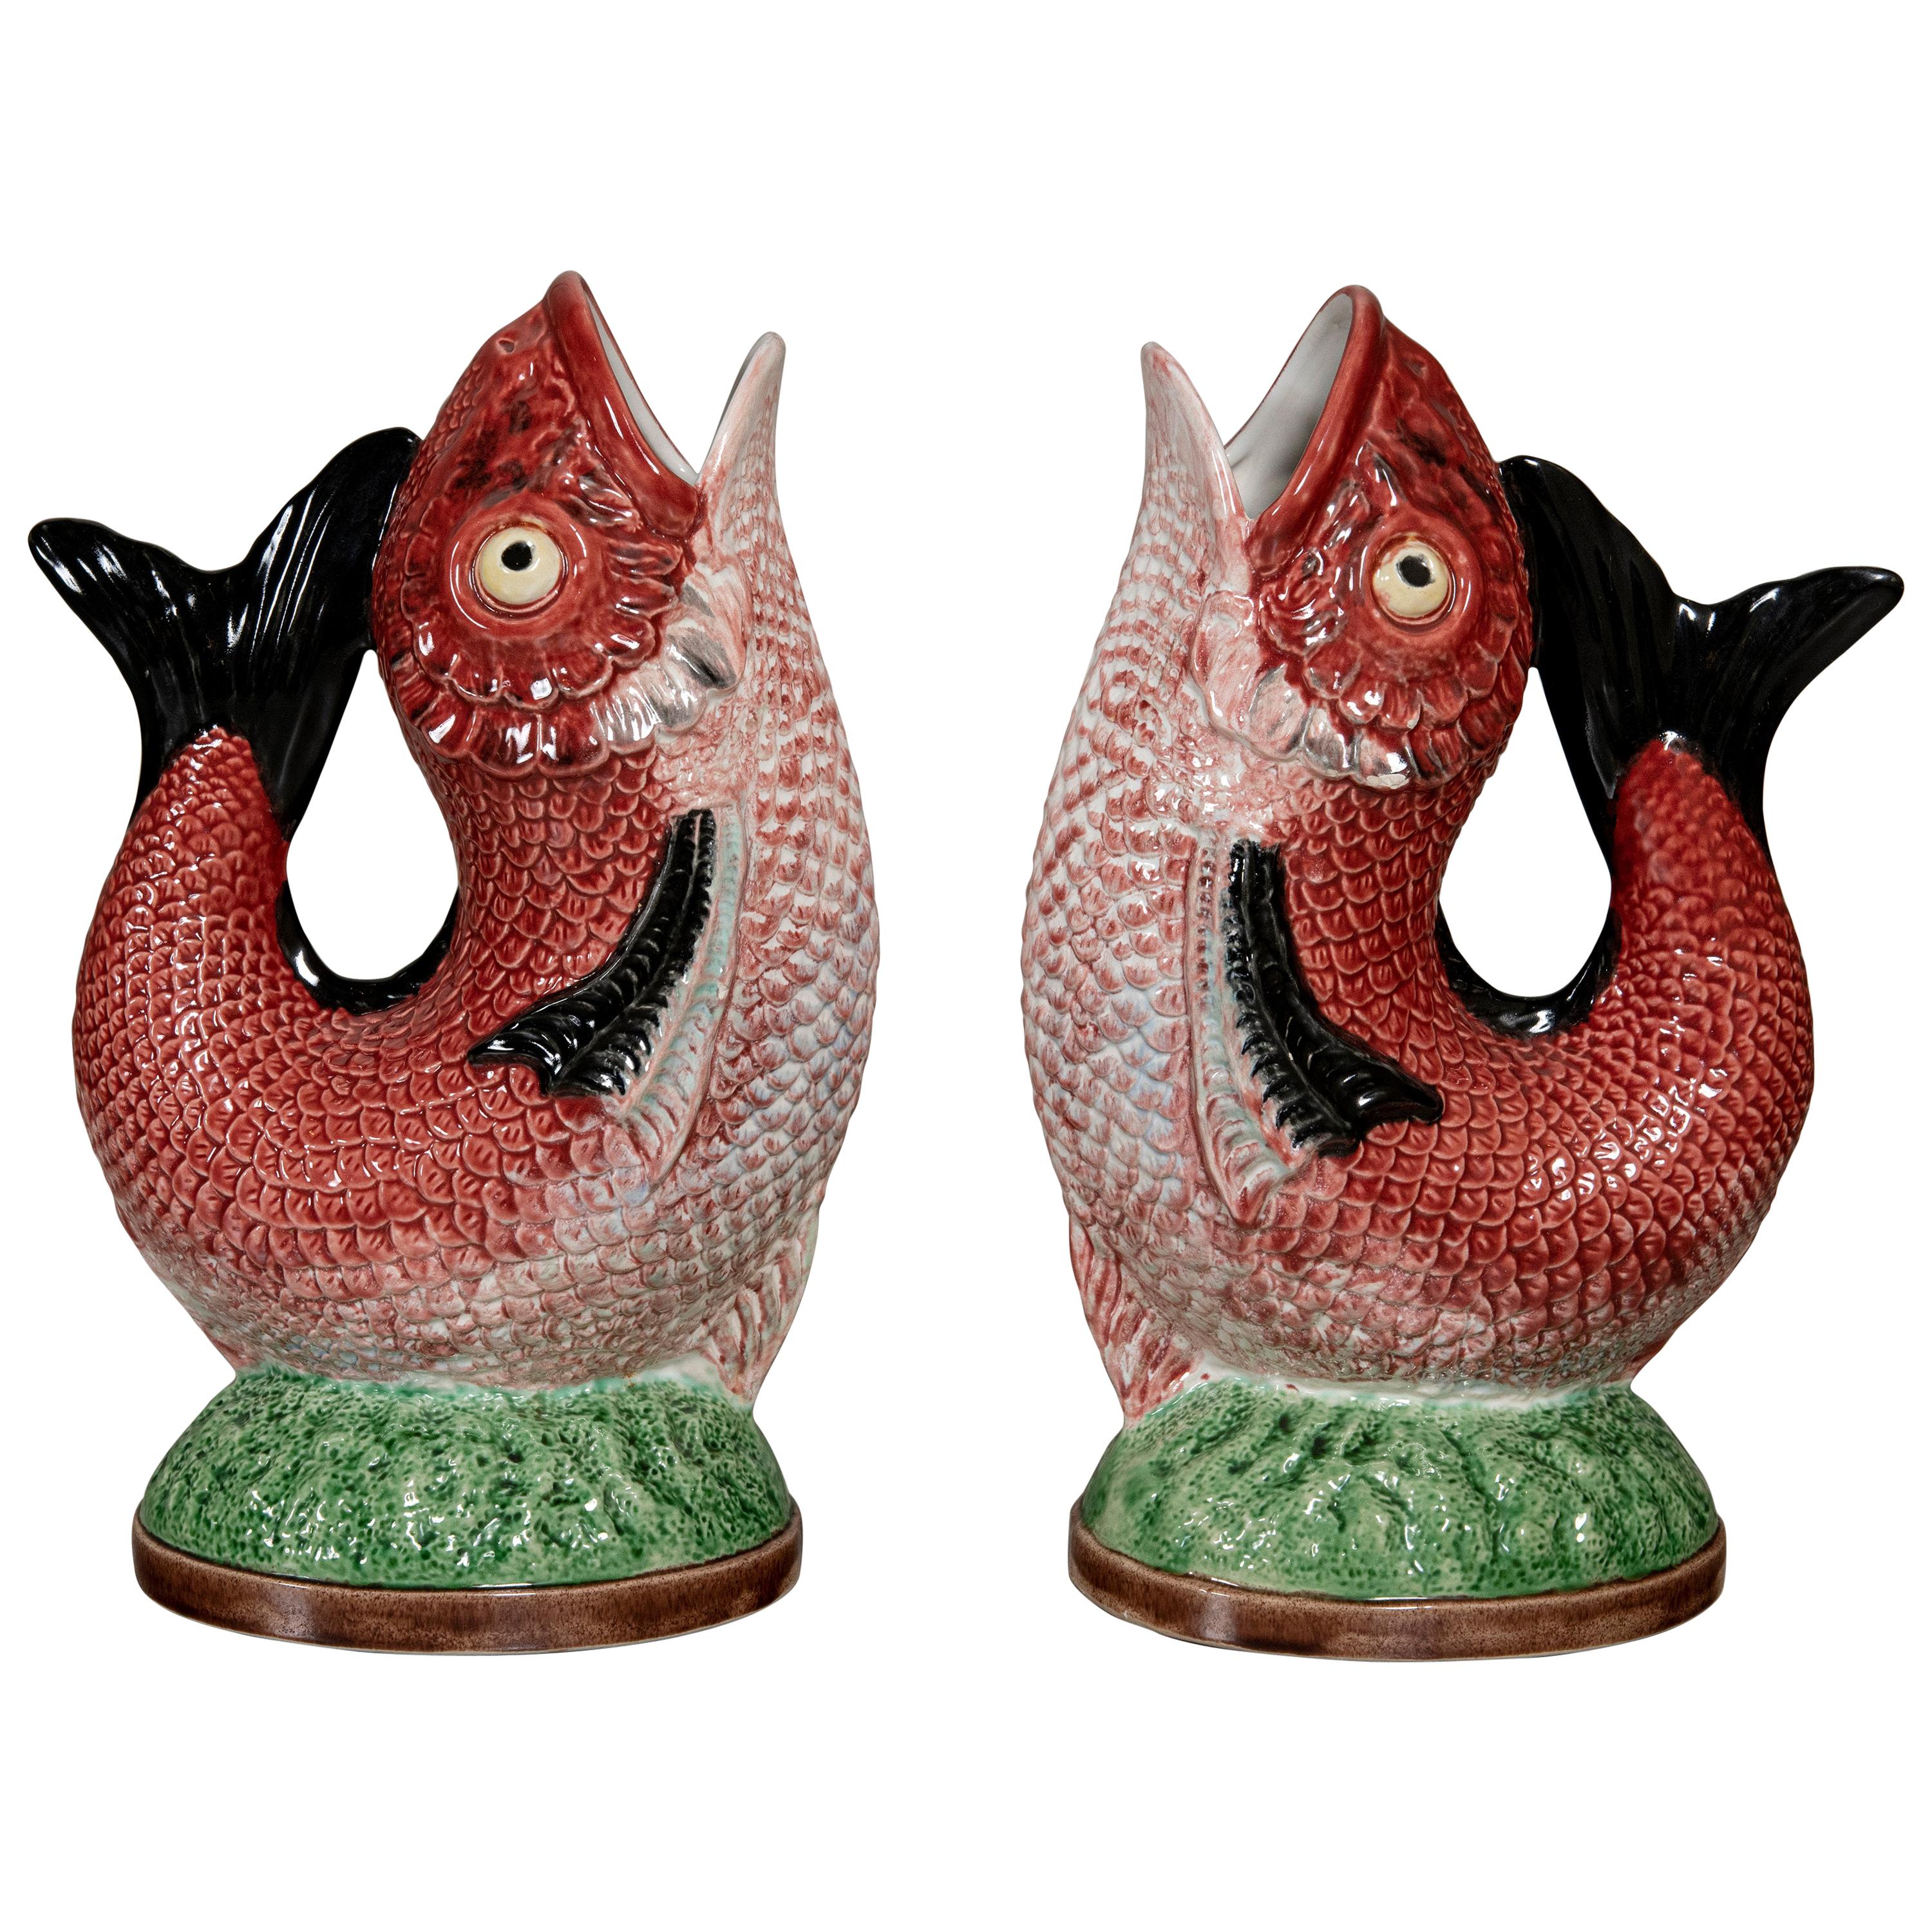 Pair of Painted Ceramic Fish Pitchers by Bordallo Pinheiro, Portugal, circa 1900 For Sale